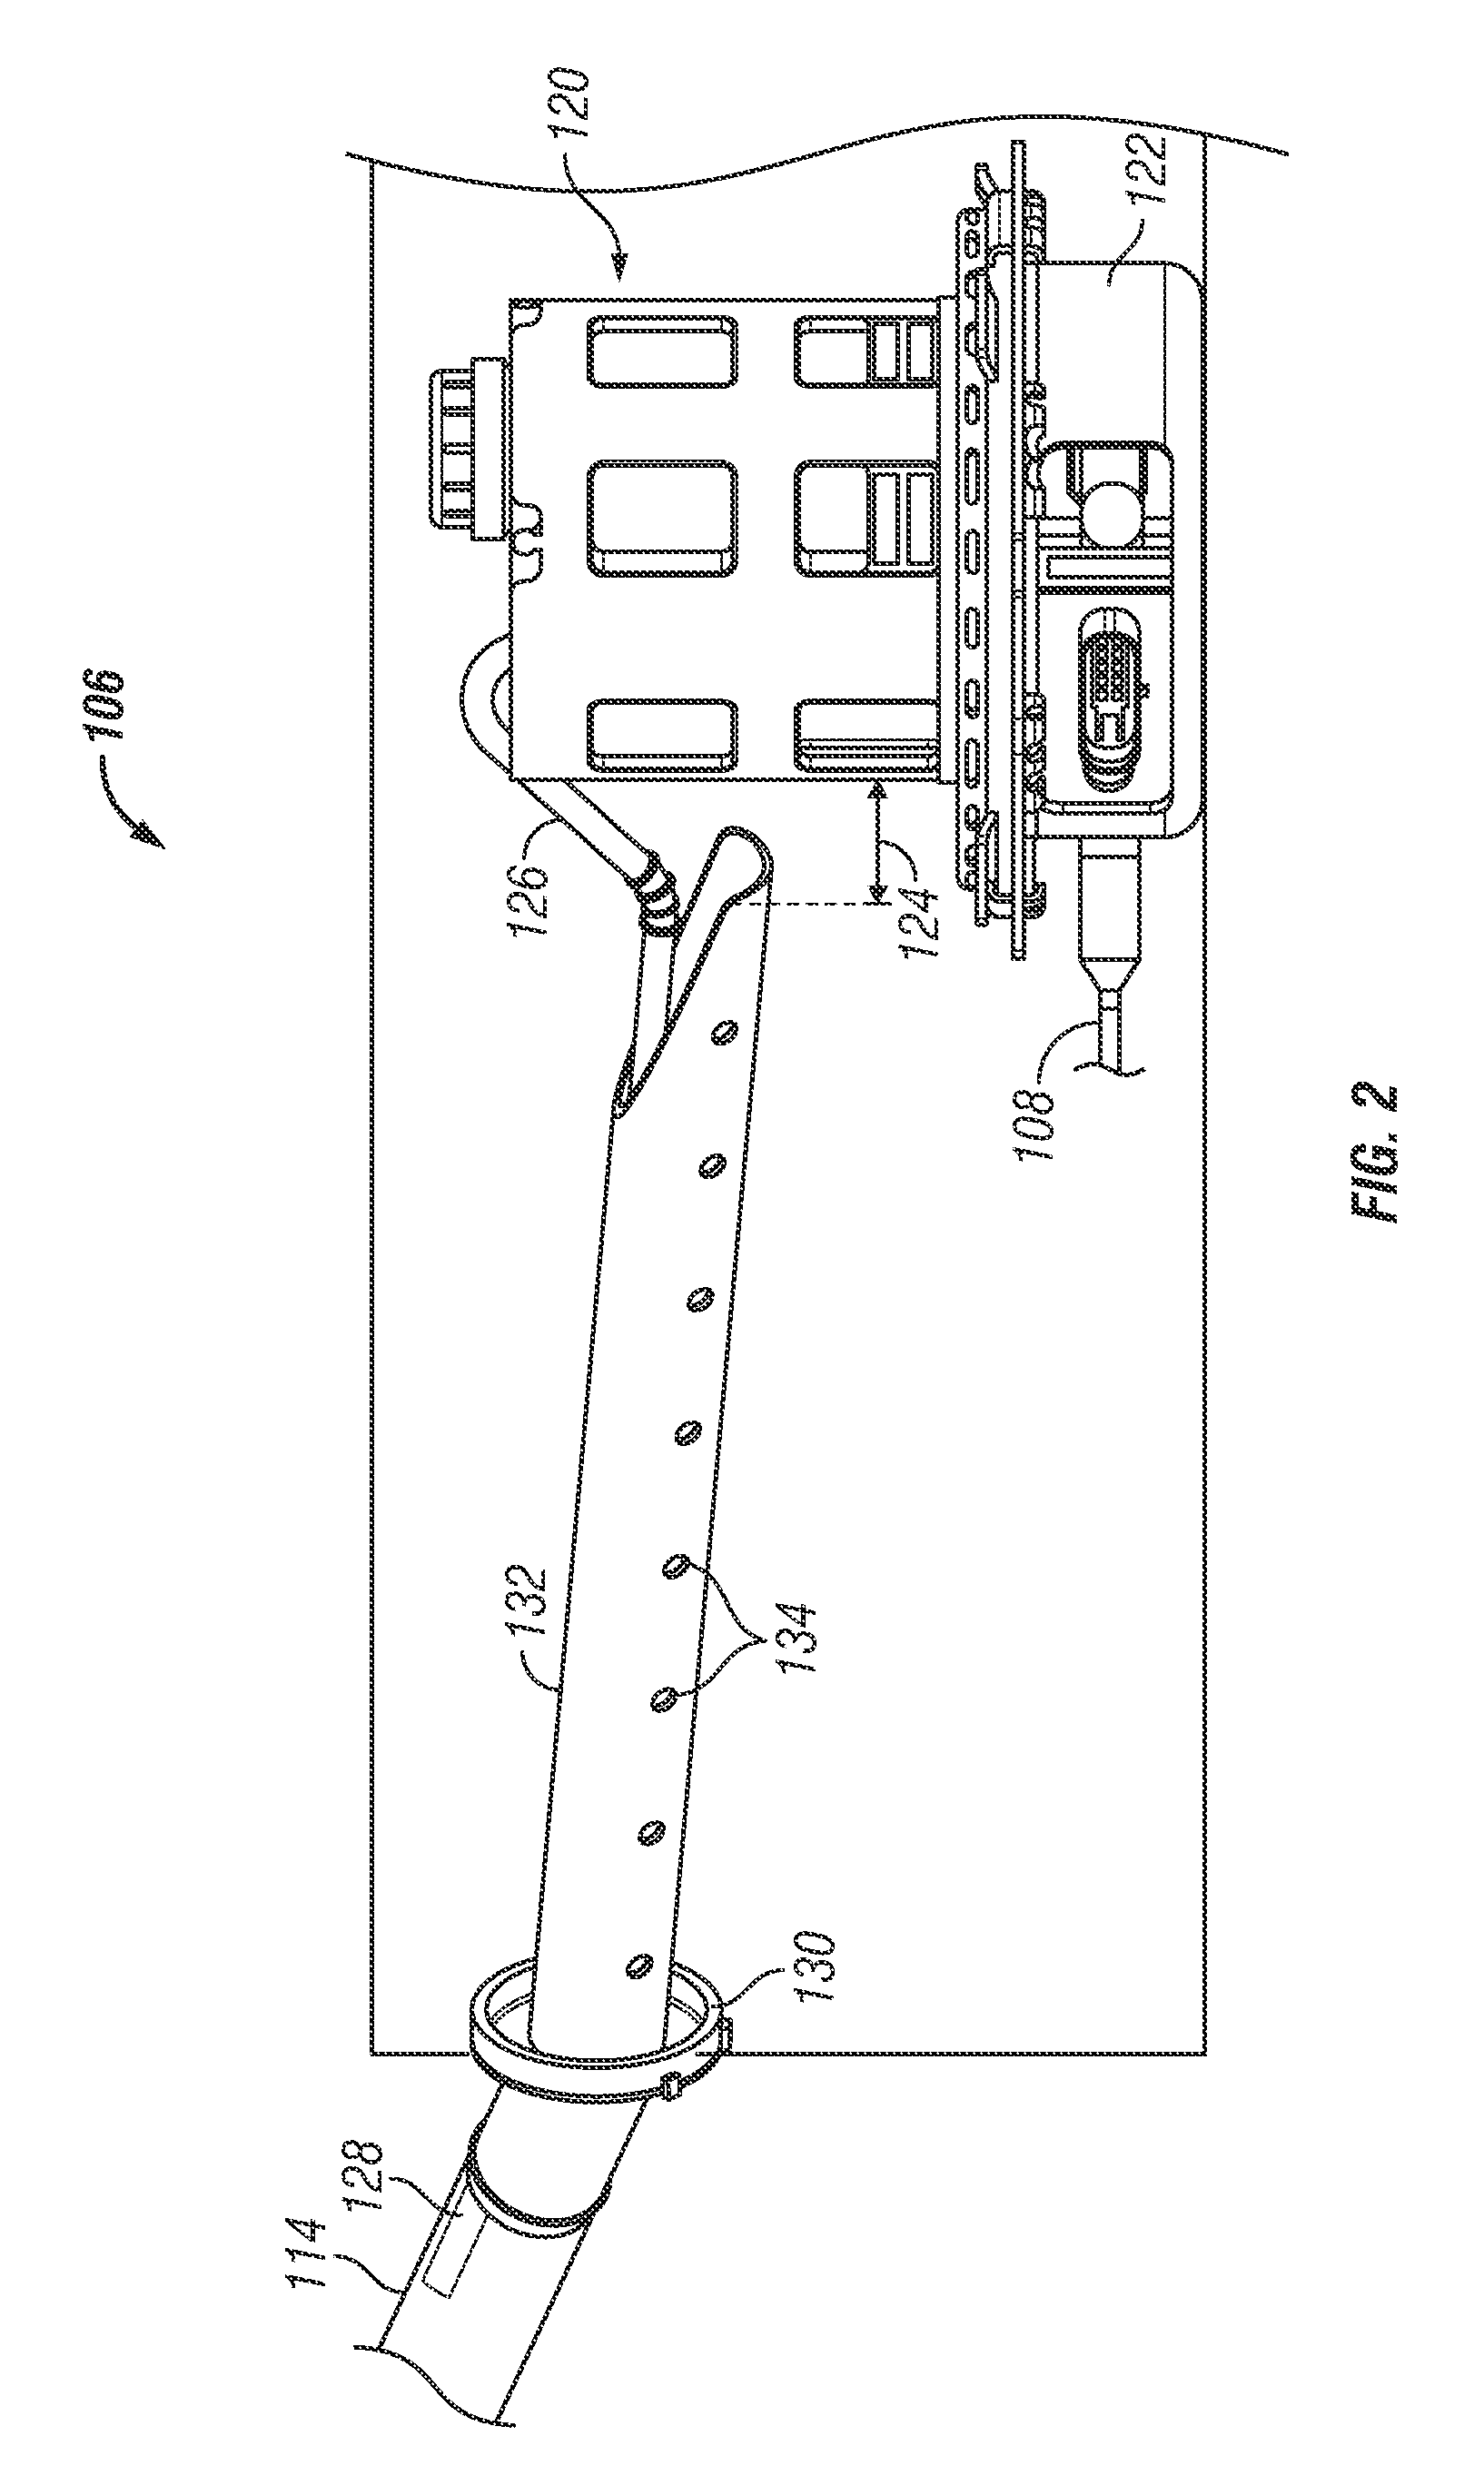 Emission control system for a vehicle